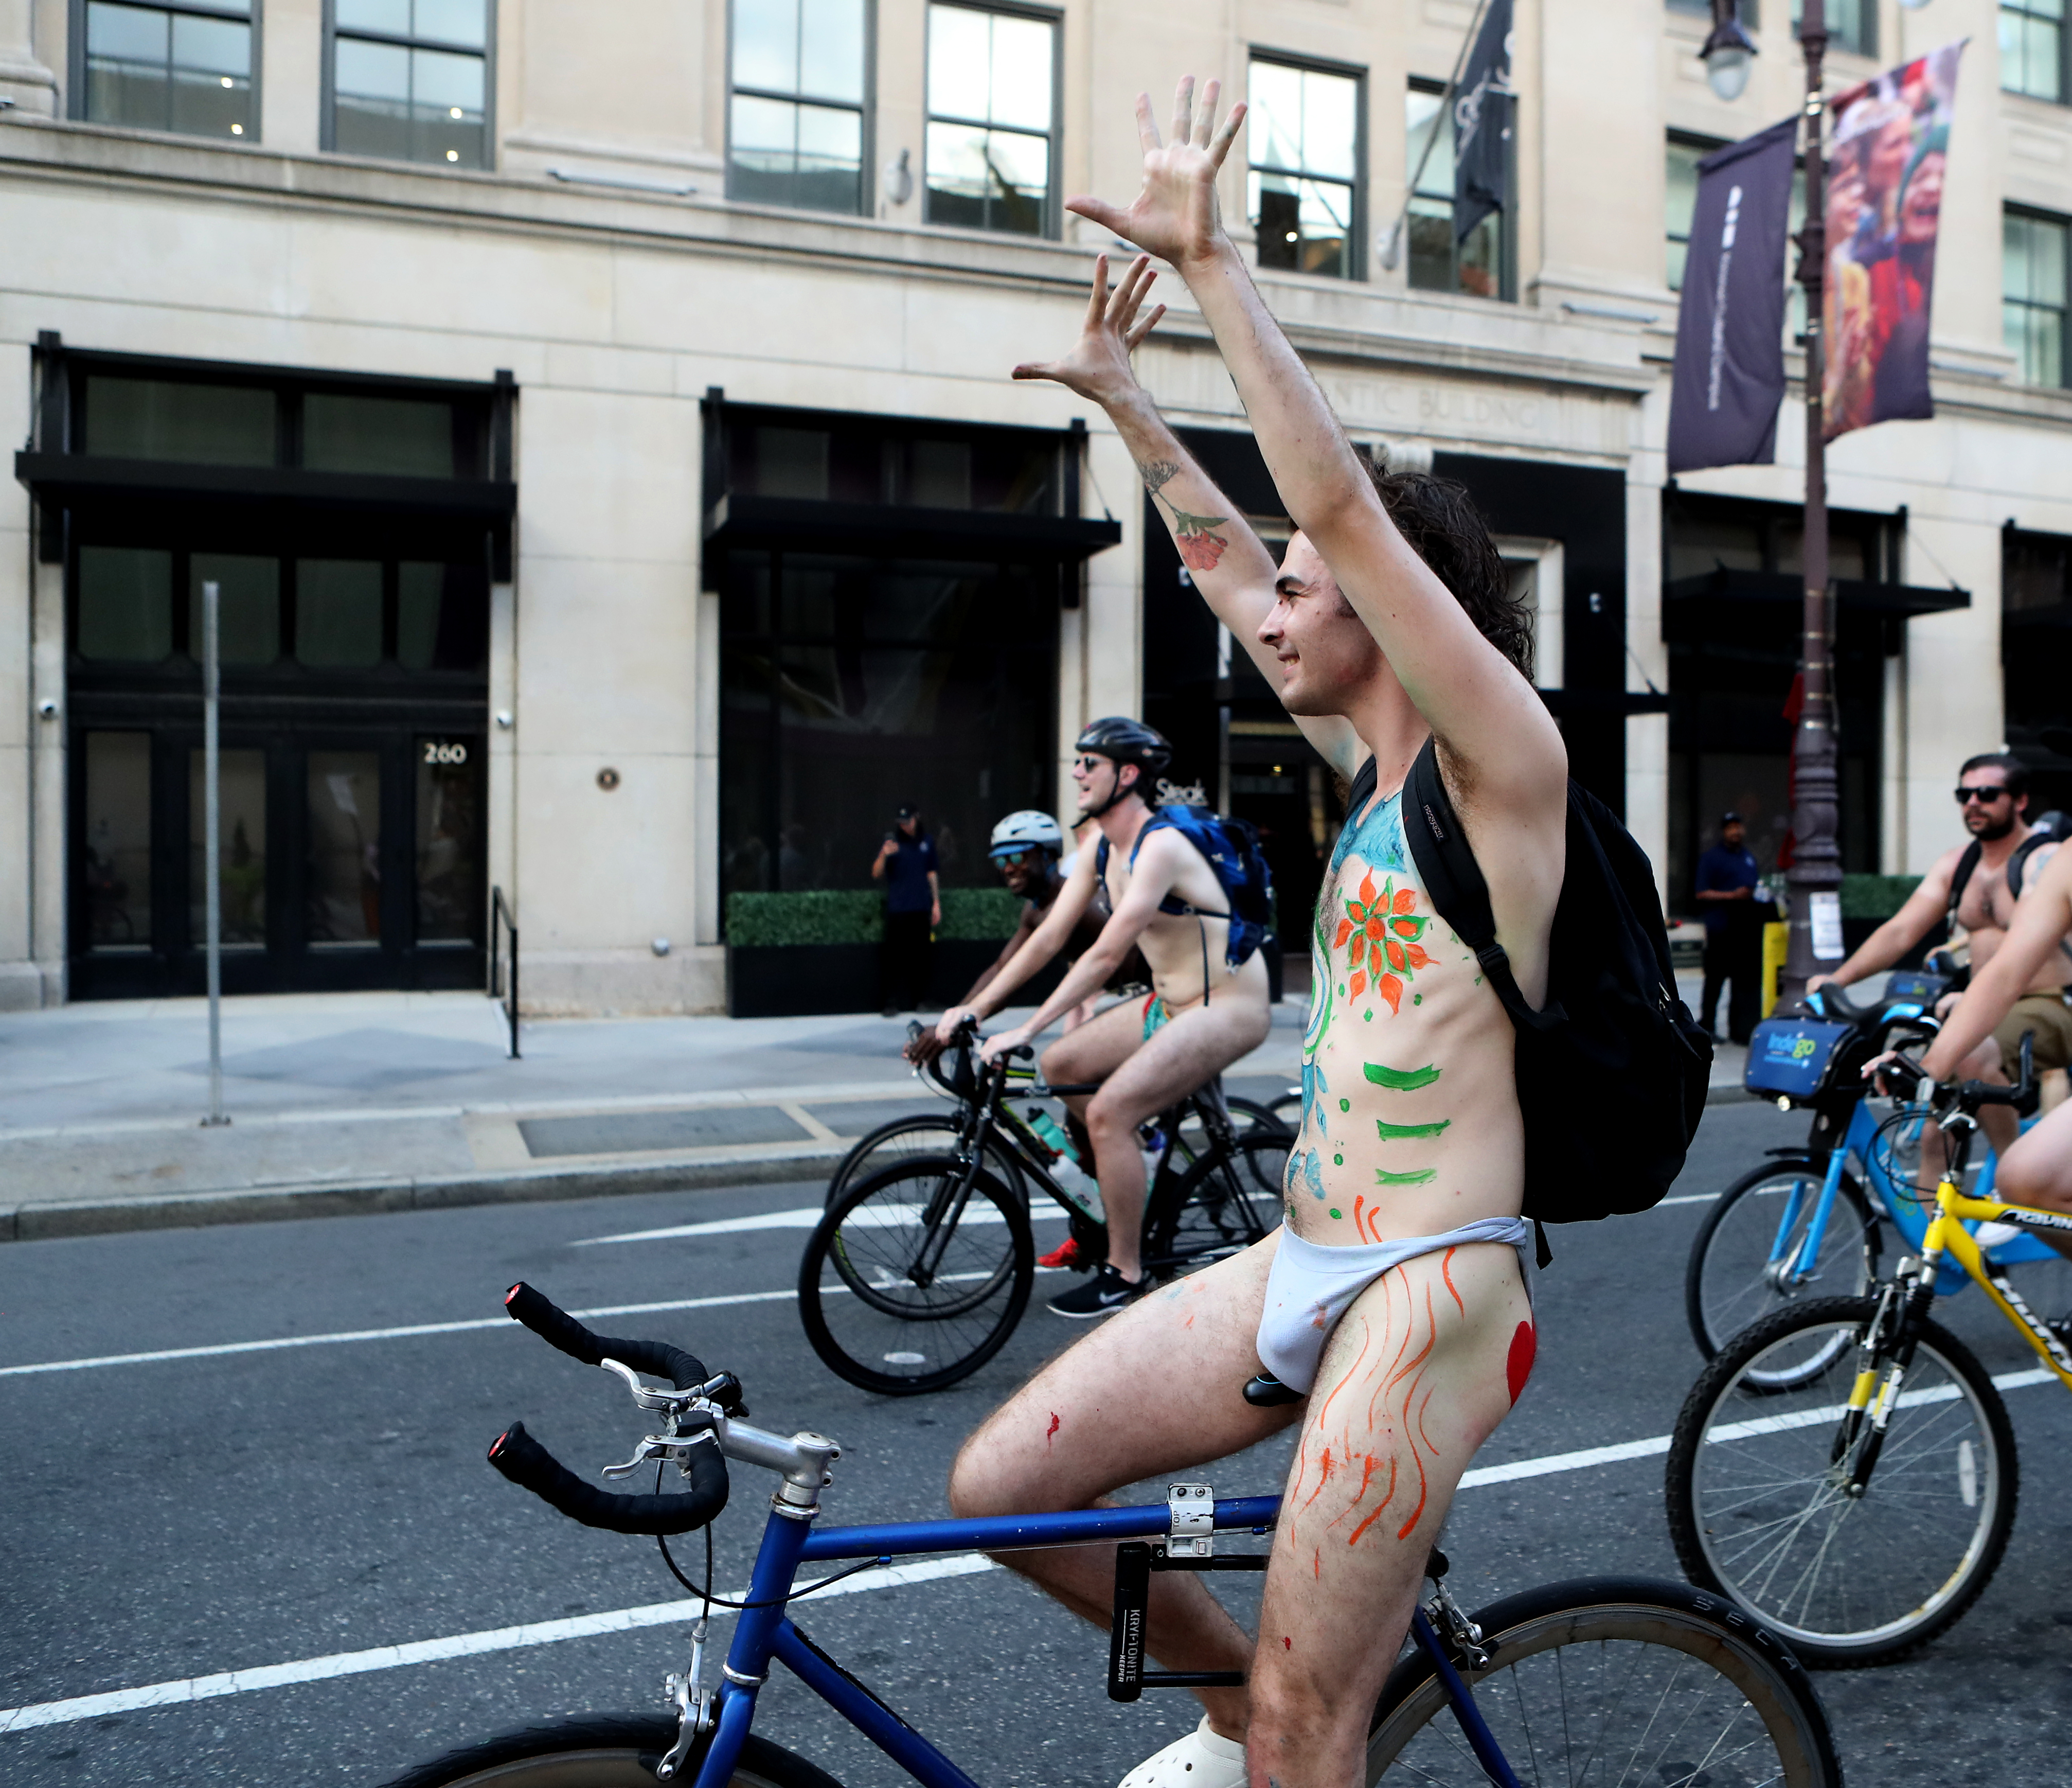 People ride bikes along South Broad Street in Philadelphia during the Philly Naked Bike Ride, Saturday, Aug. 27, 2022.